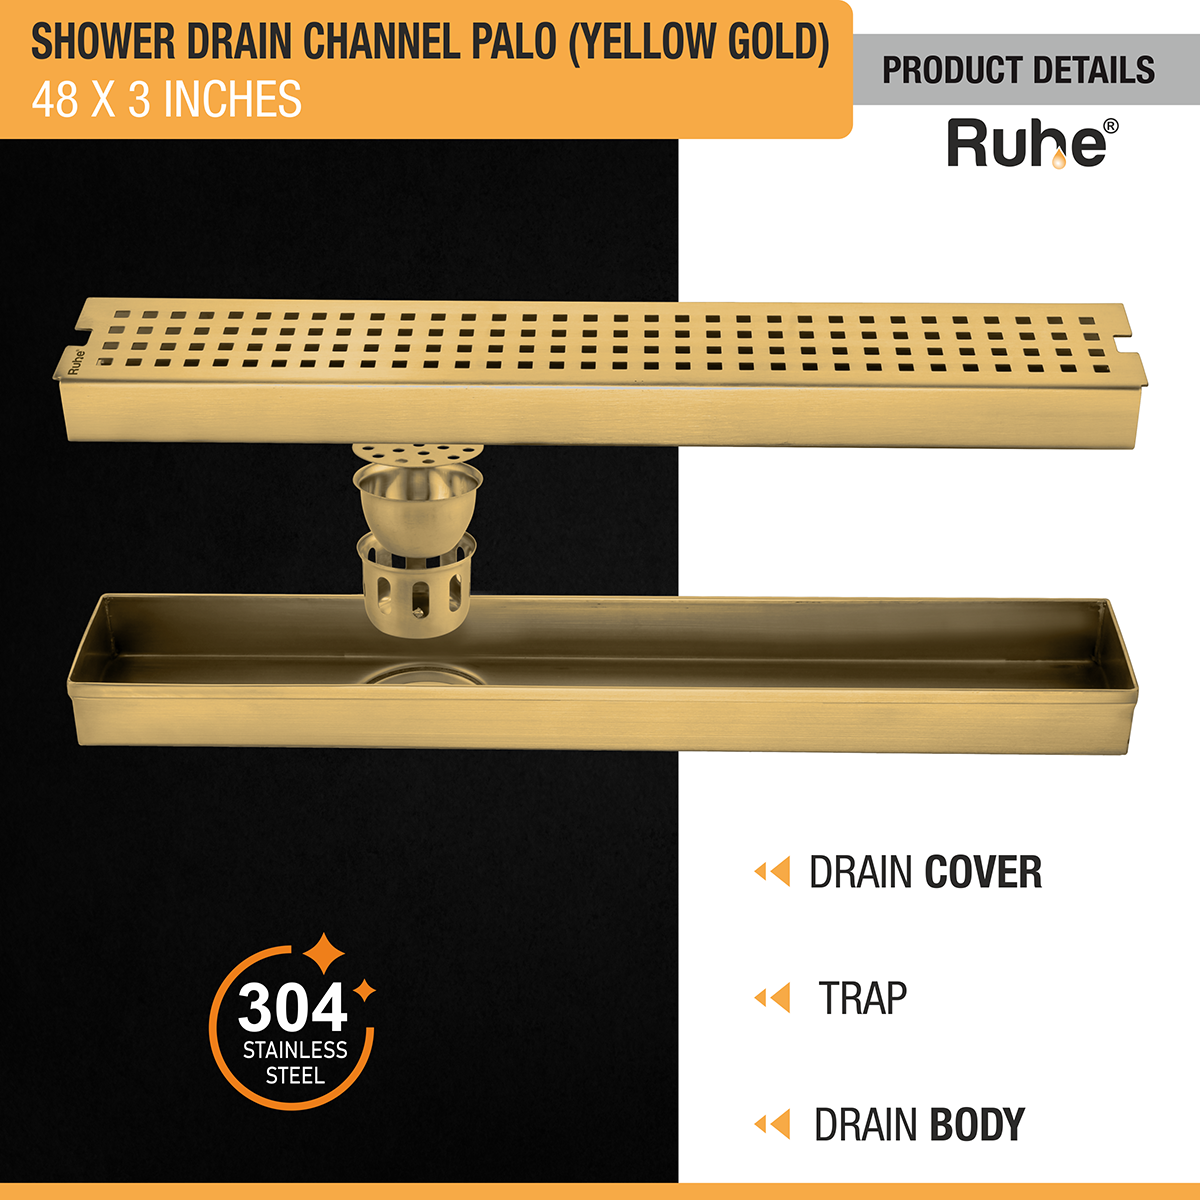 Palo Shower Drain Channel (48 x 3 Inches) YELLOW GOLD product details